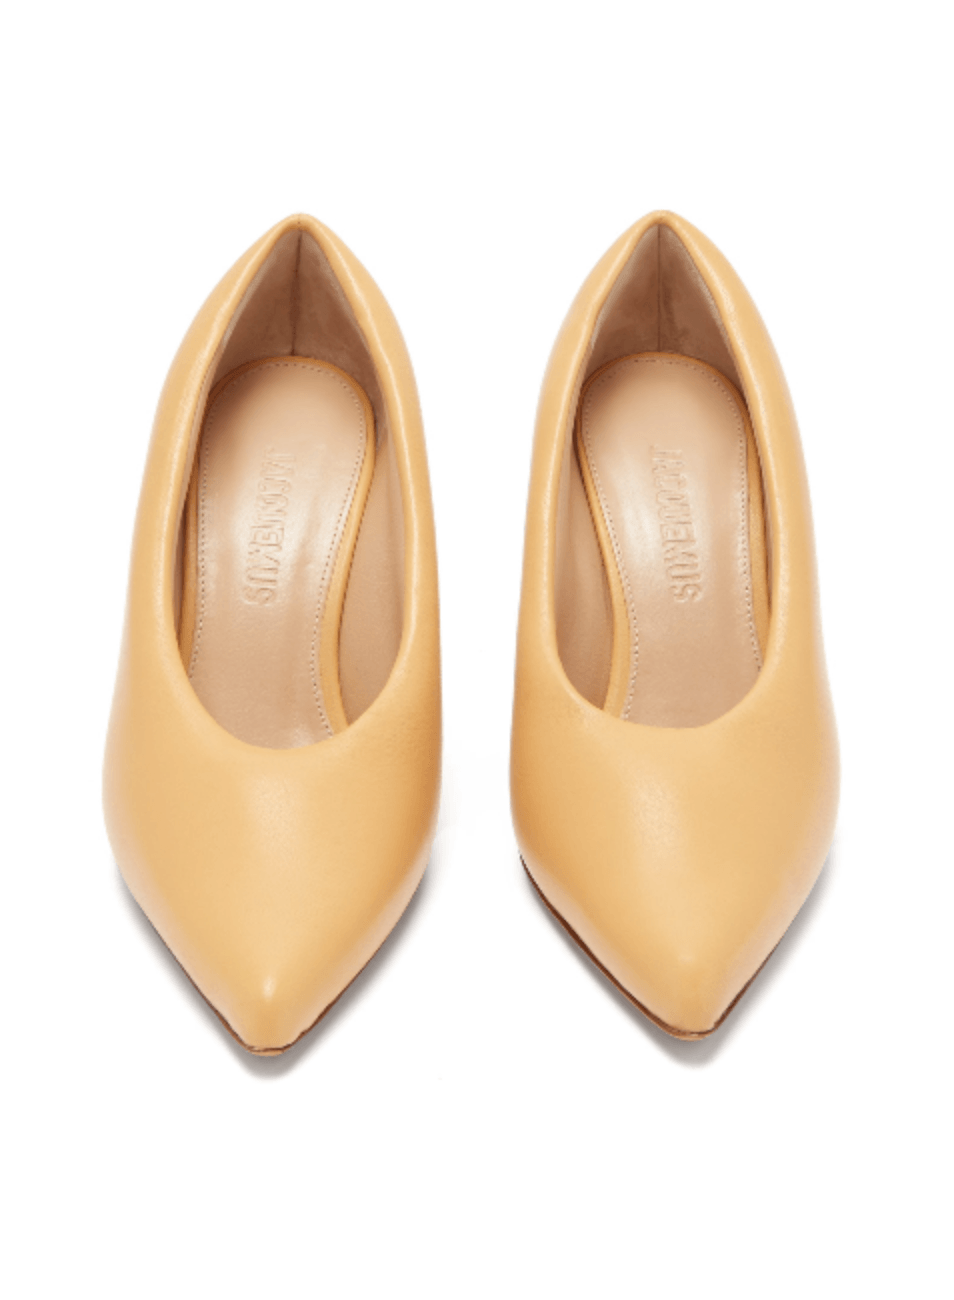 SMOOTH LEATHER PUMPS - codressing